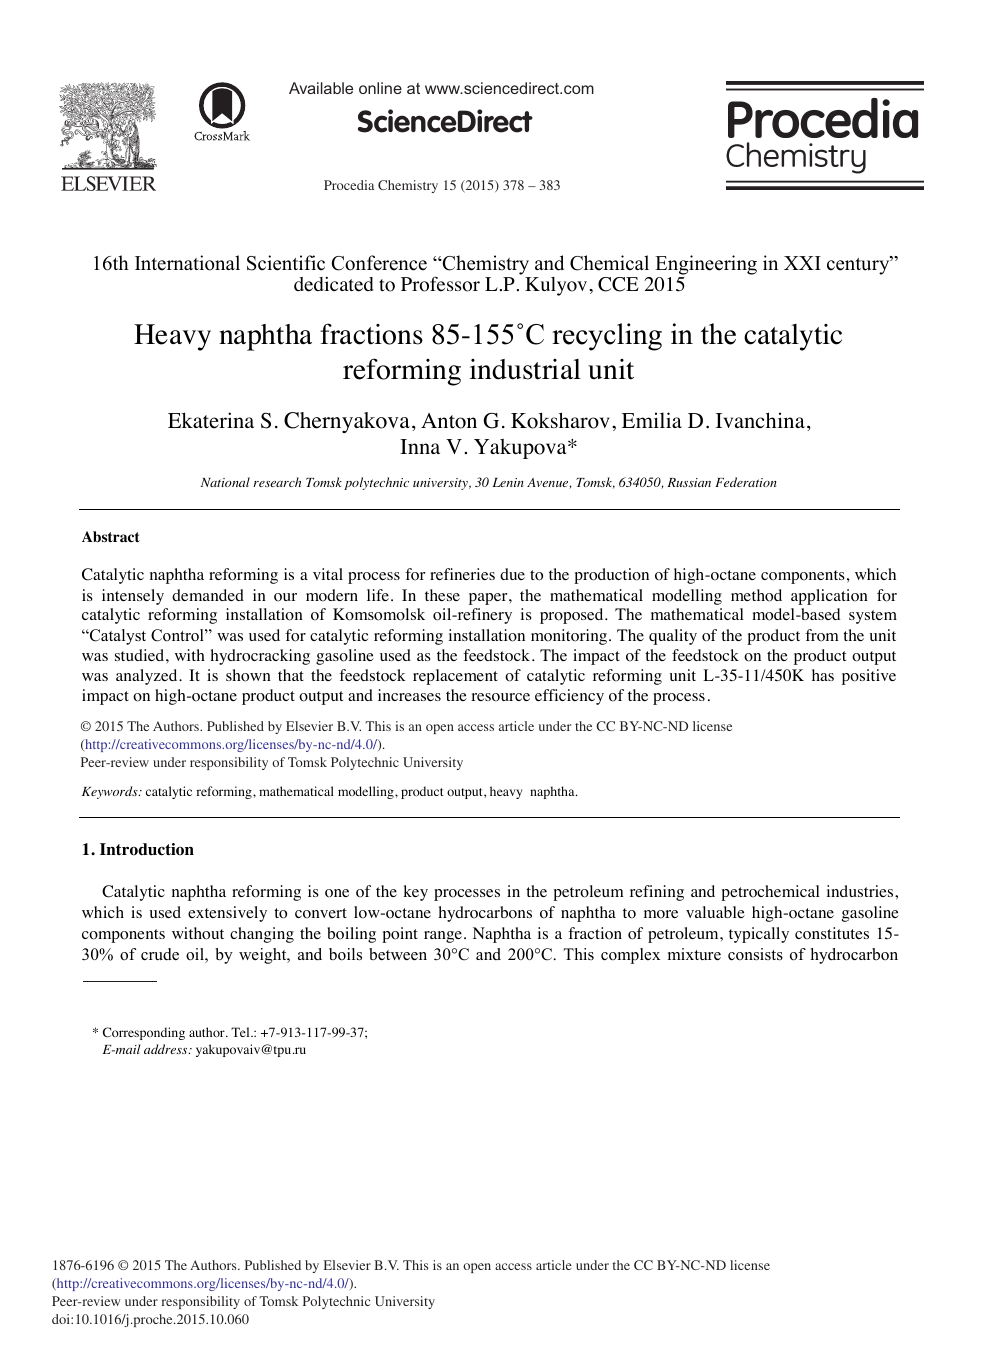 Heavy Naphtha Fractions 85 155 C Recycling In The Catalytic Reforming Industrial Unit Topic Of Research Paper In Agriculture Forestry And Fisheries Download Scholarly Article Pdf And Read For Free On Cyberleninka